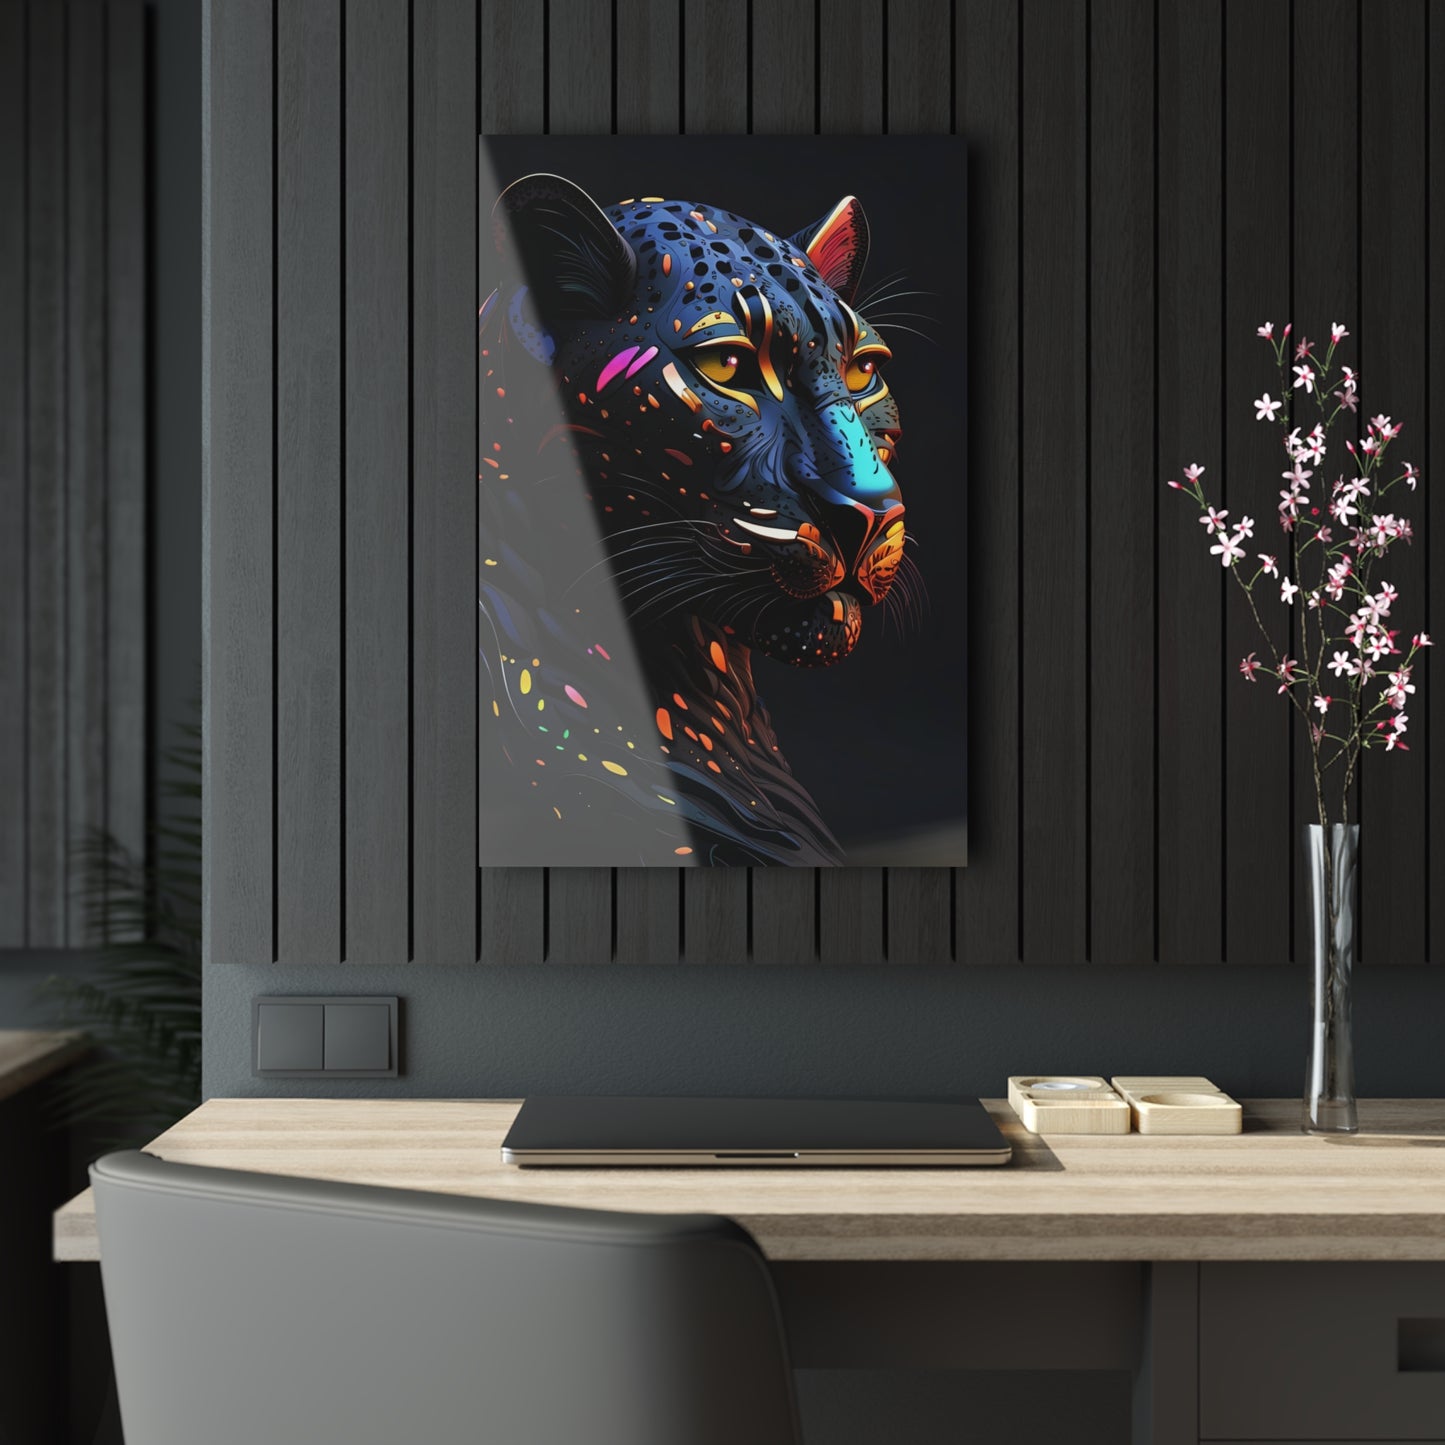 Stylized Colorful Black Panther Head printed on a crystal clear acrylic panel 20x30 hung